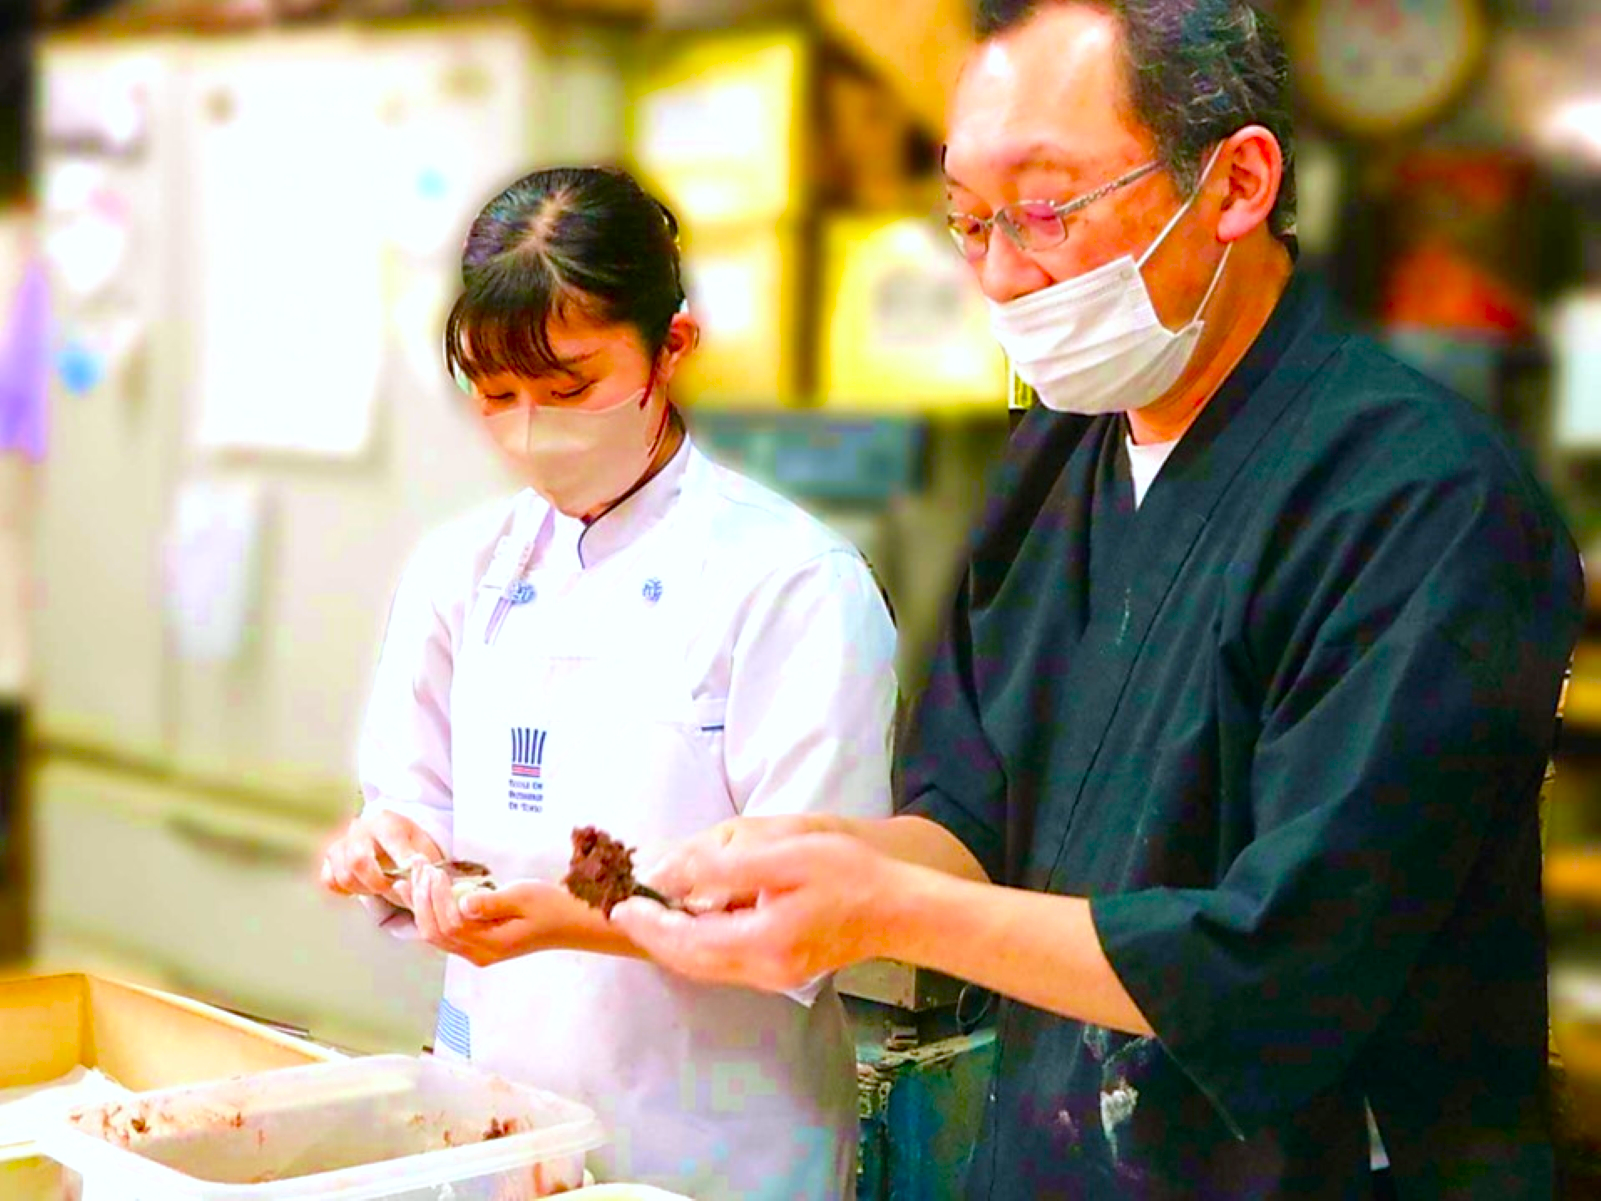 Genuine Wagashi Experience by the Maestro at his Mochi Shop